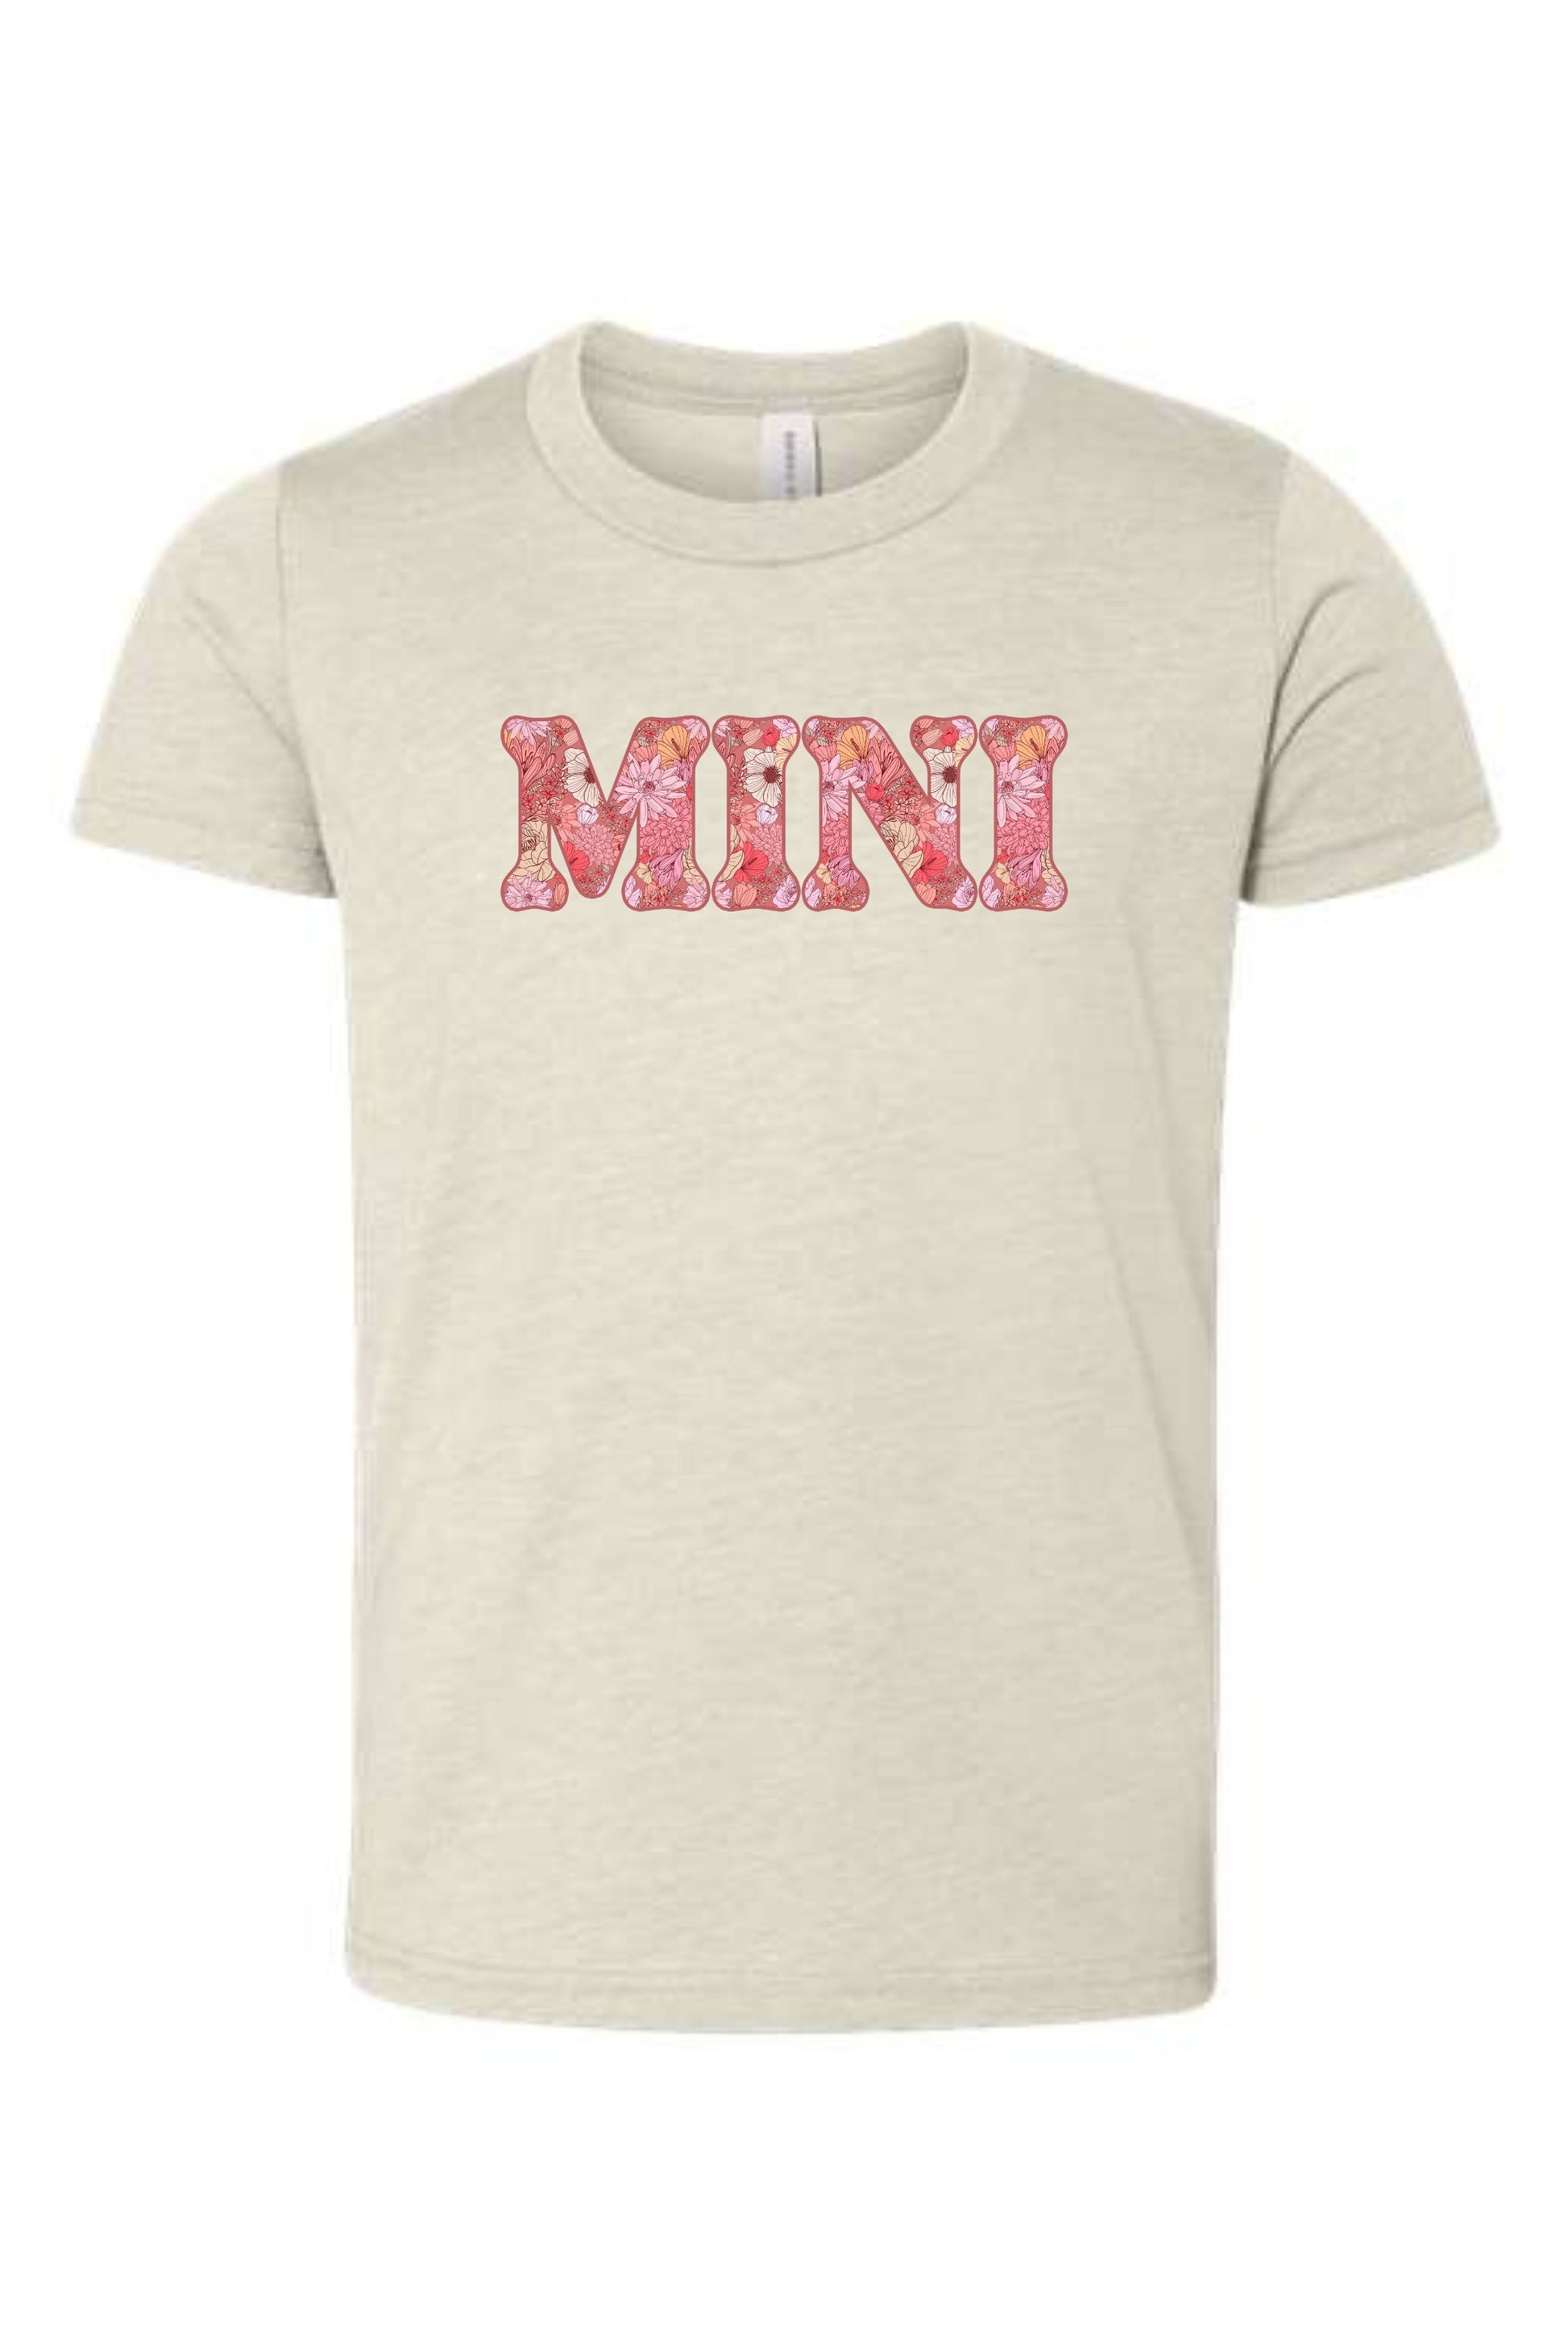 Floral Mini | Kids Tee | RTS-Sister Shirts-Sister Shirts, Cute & Custom Tees for Mama & Littles in Trussville, Alabama.